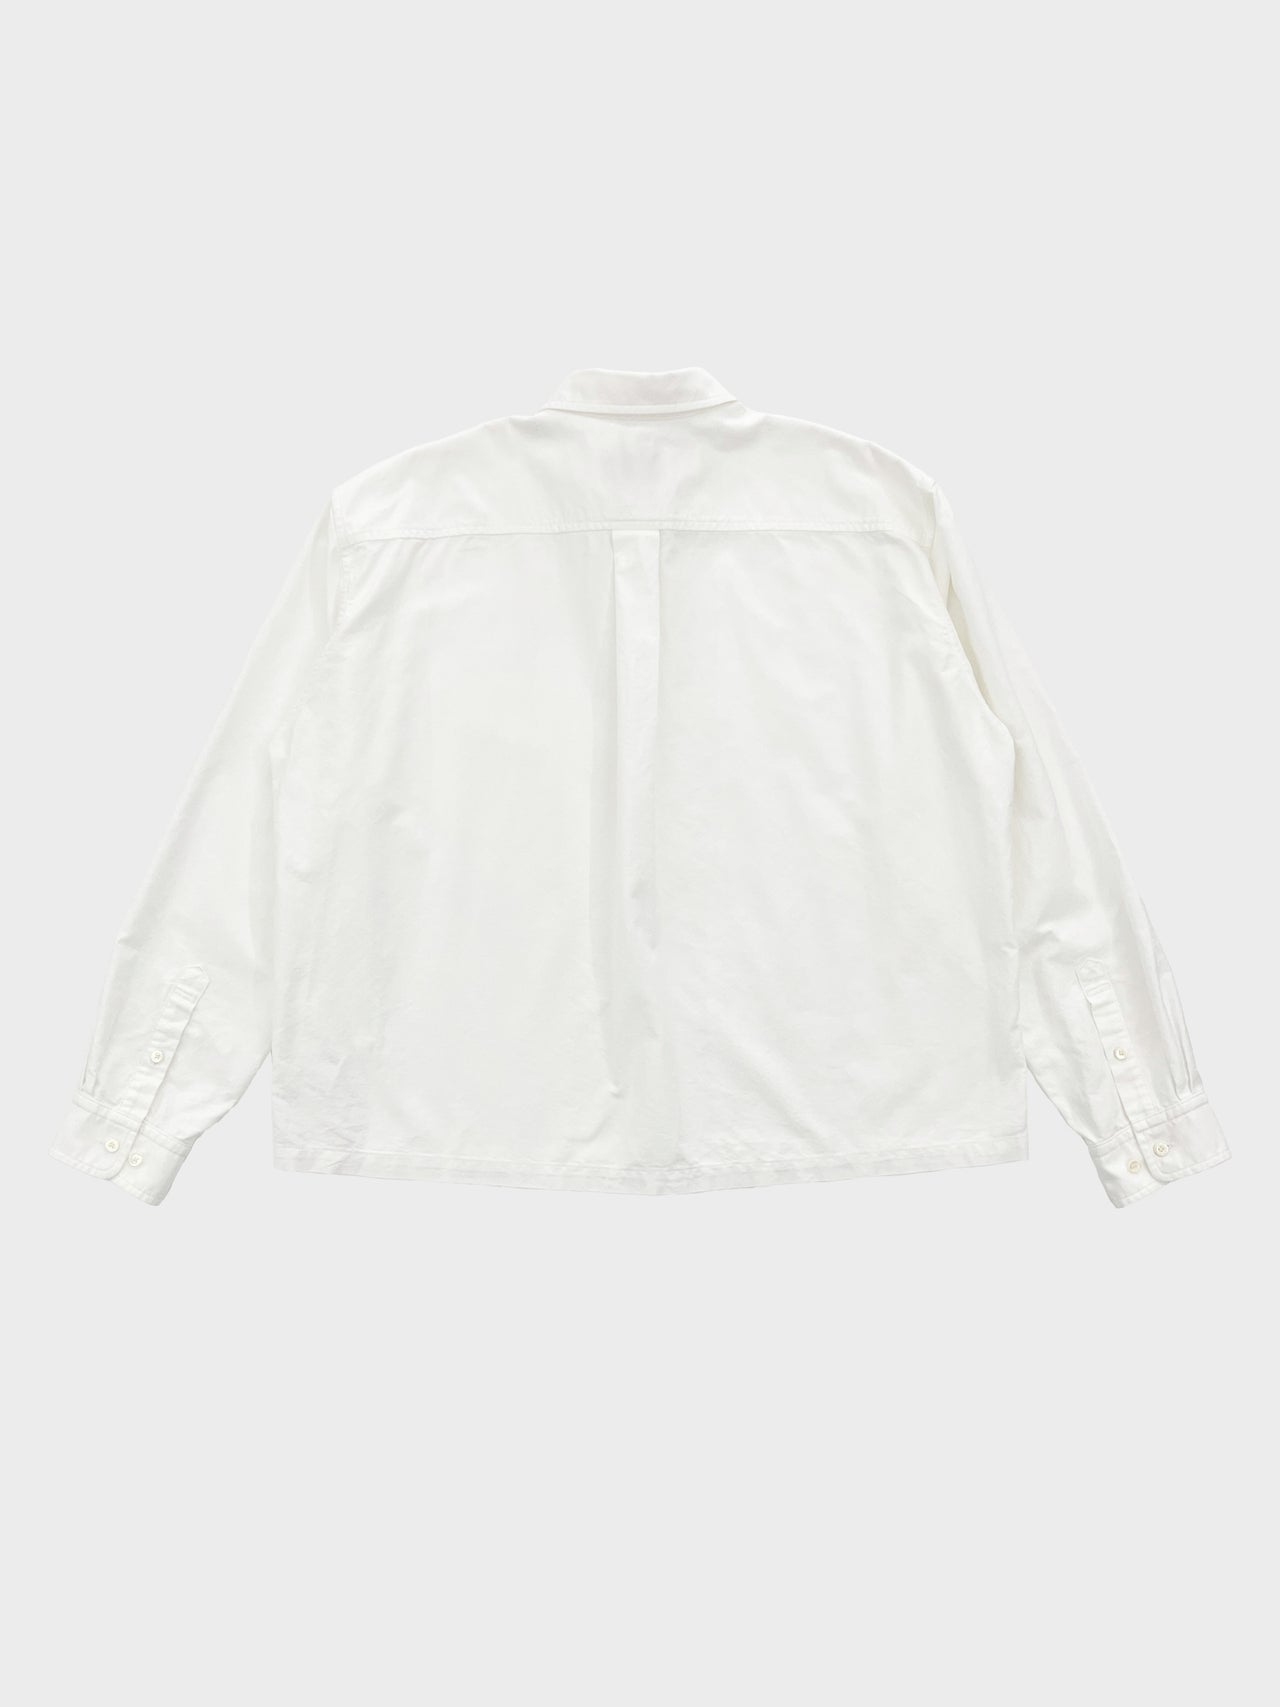 WEWILL / CROPPED SHIRT (WHITE)